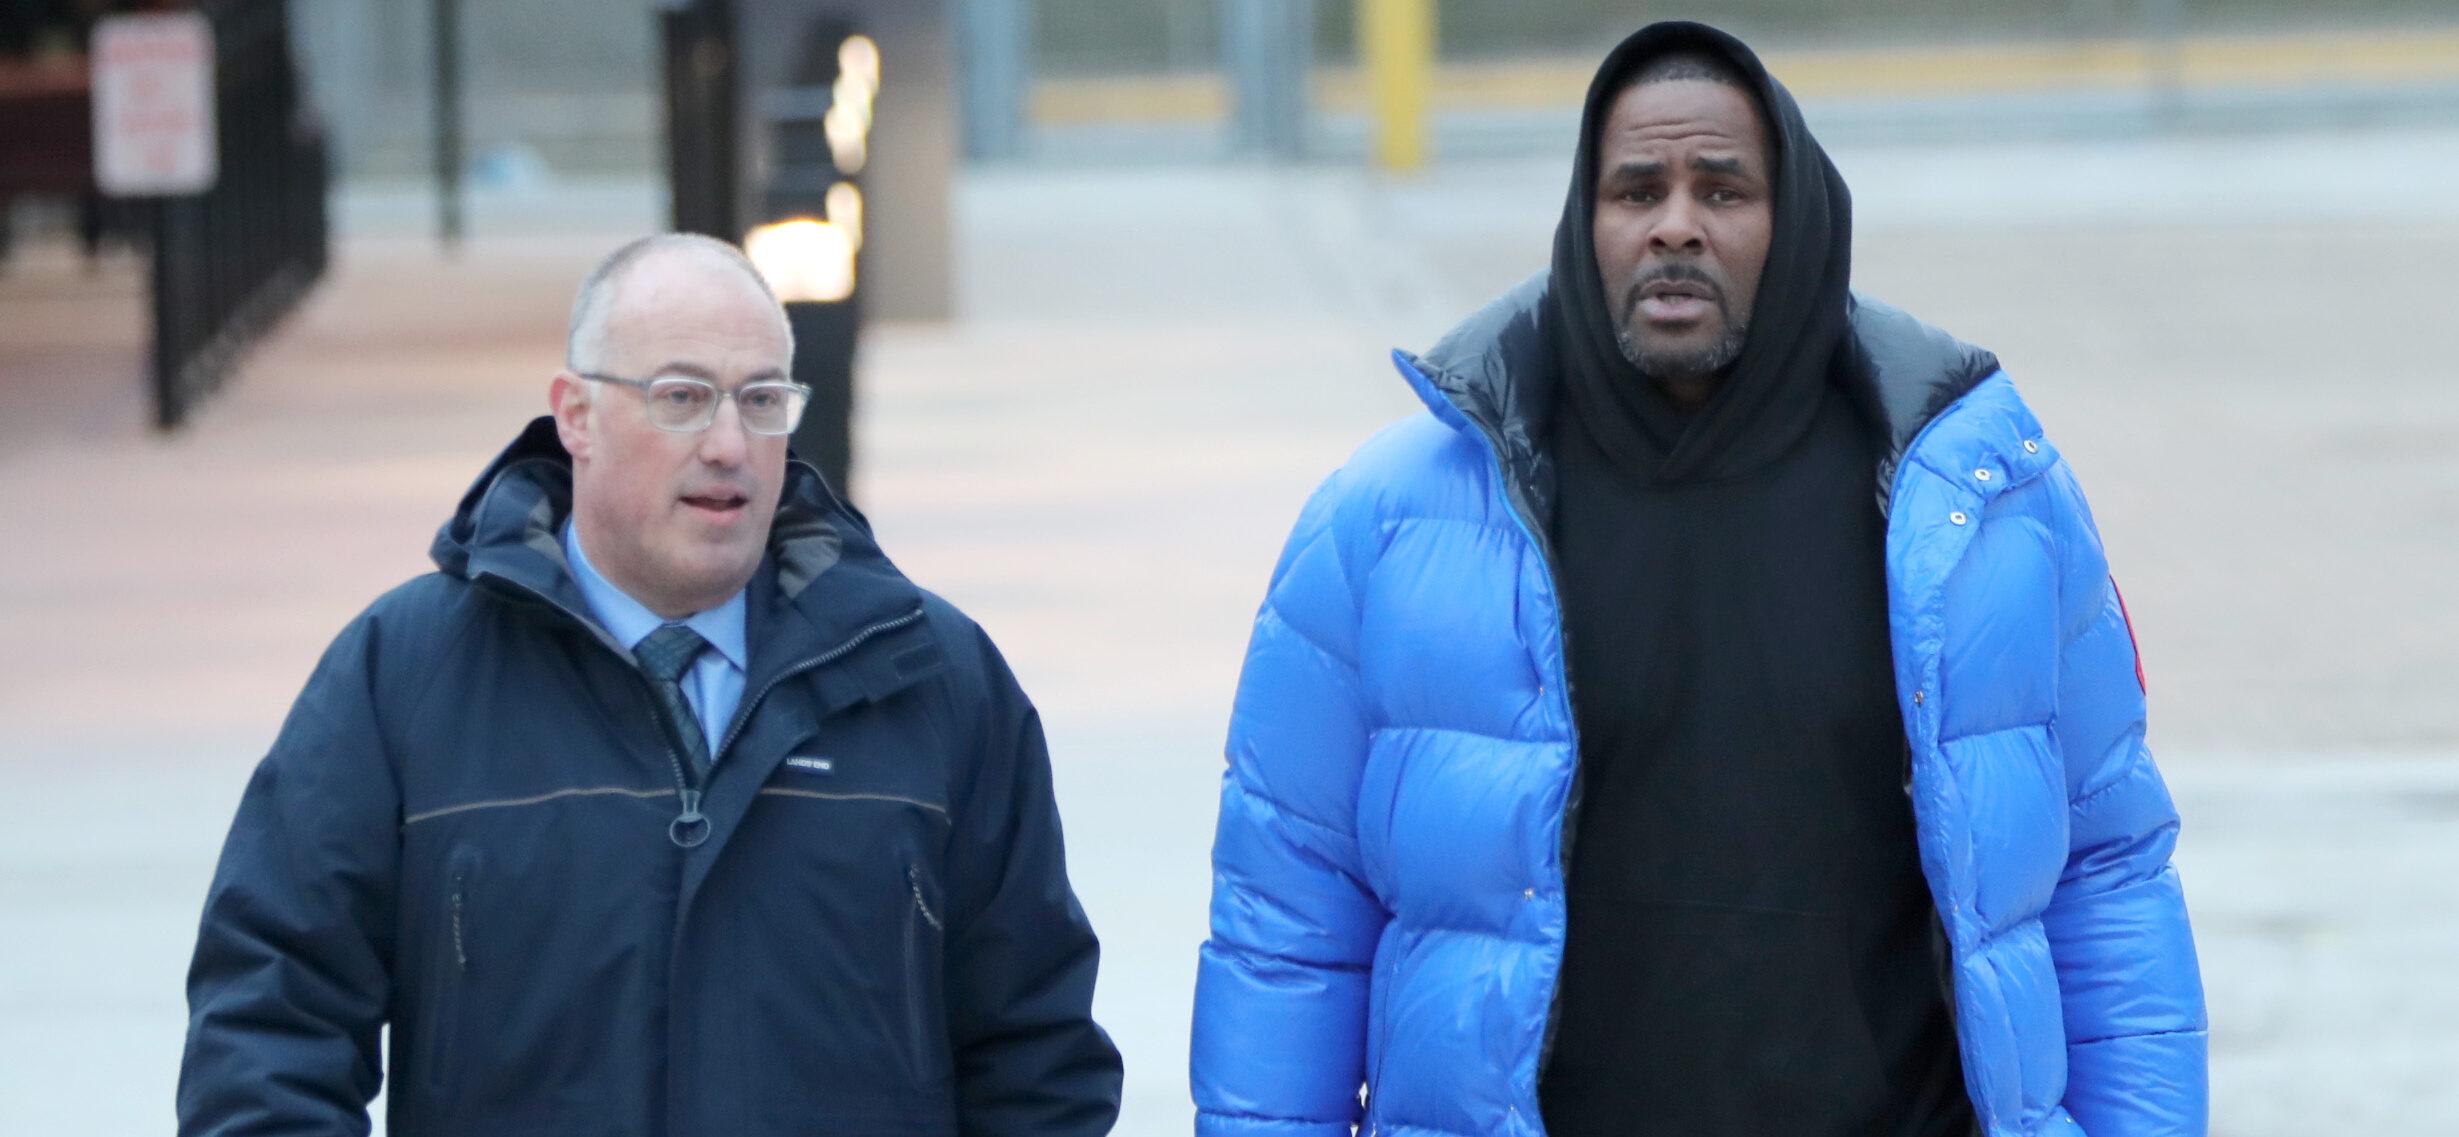 R Kelly leaves Cook County Detention Center